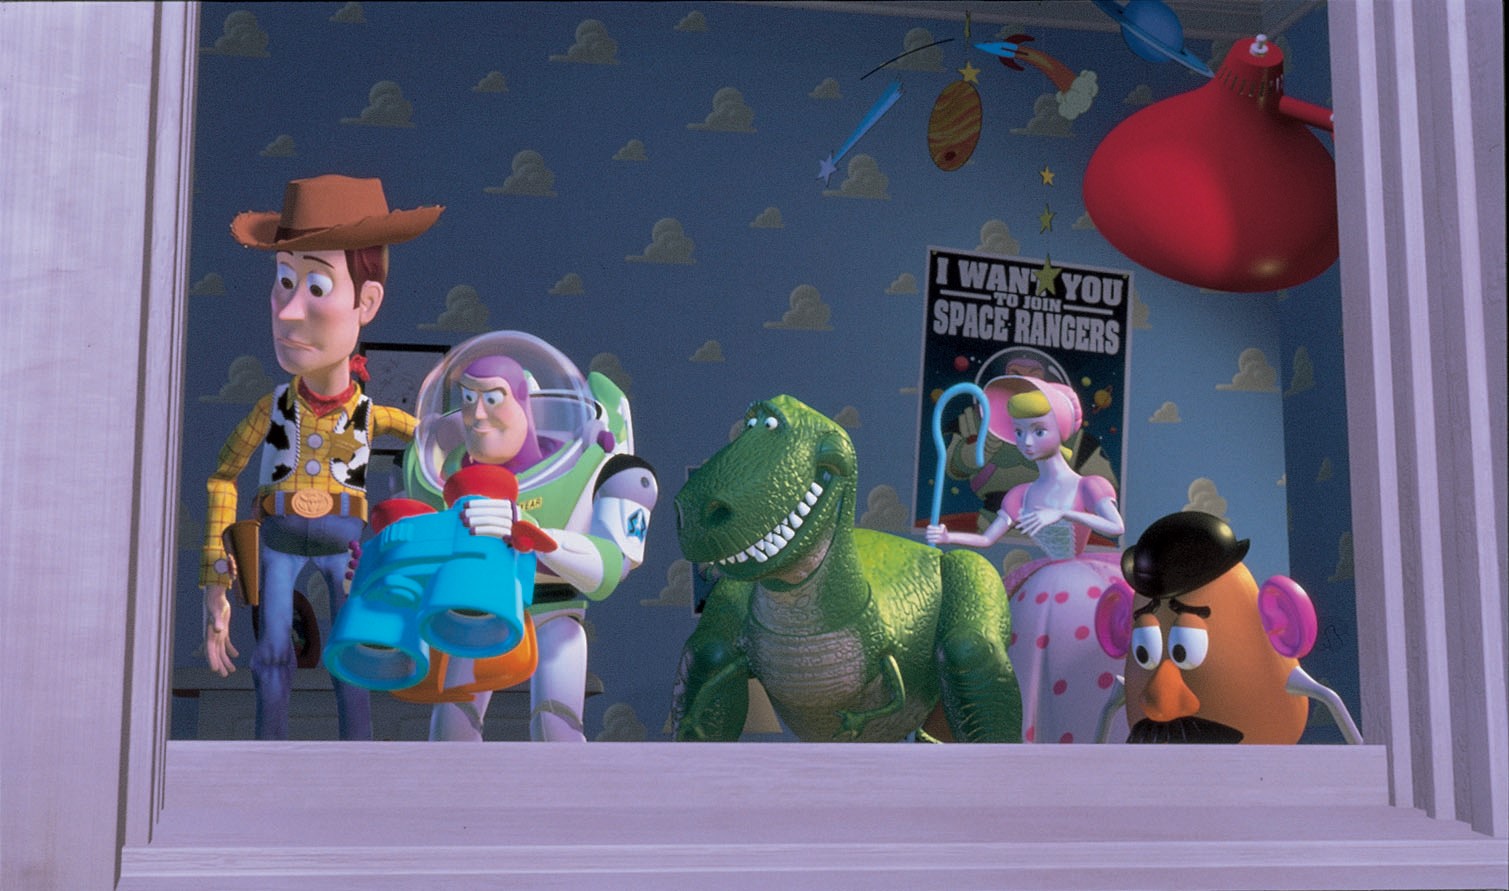 Toy story 4 (2019) subtitles. 